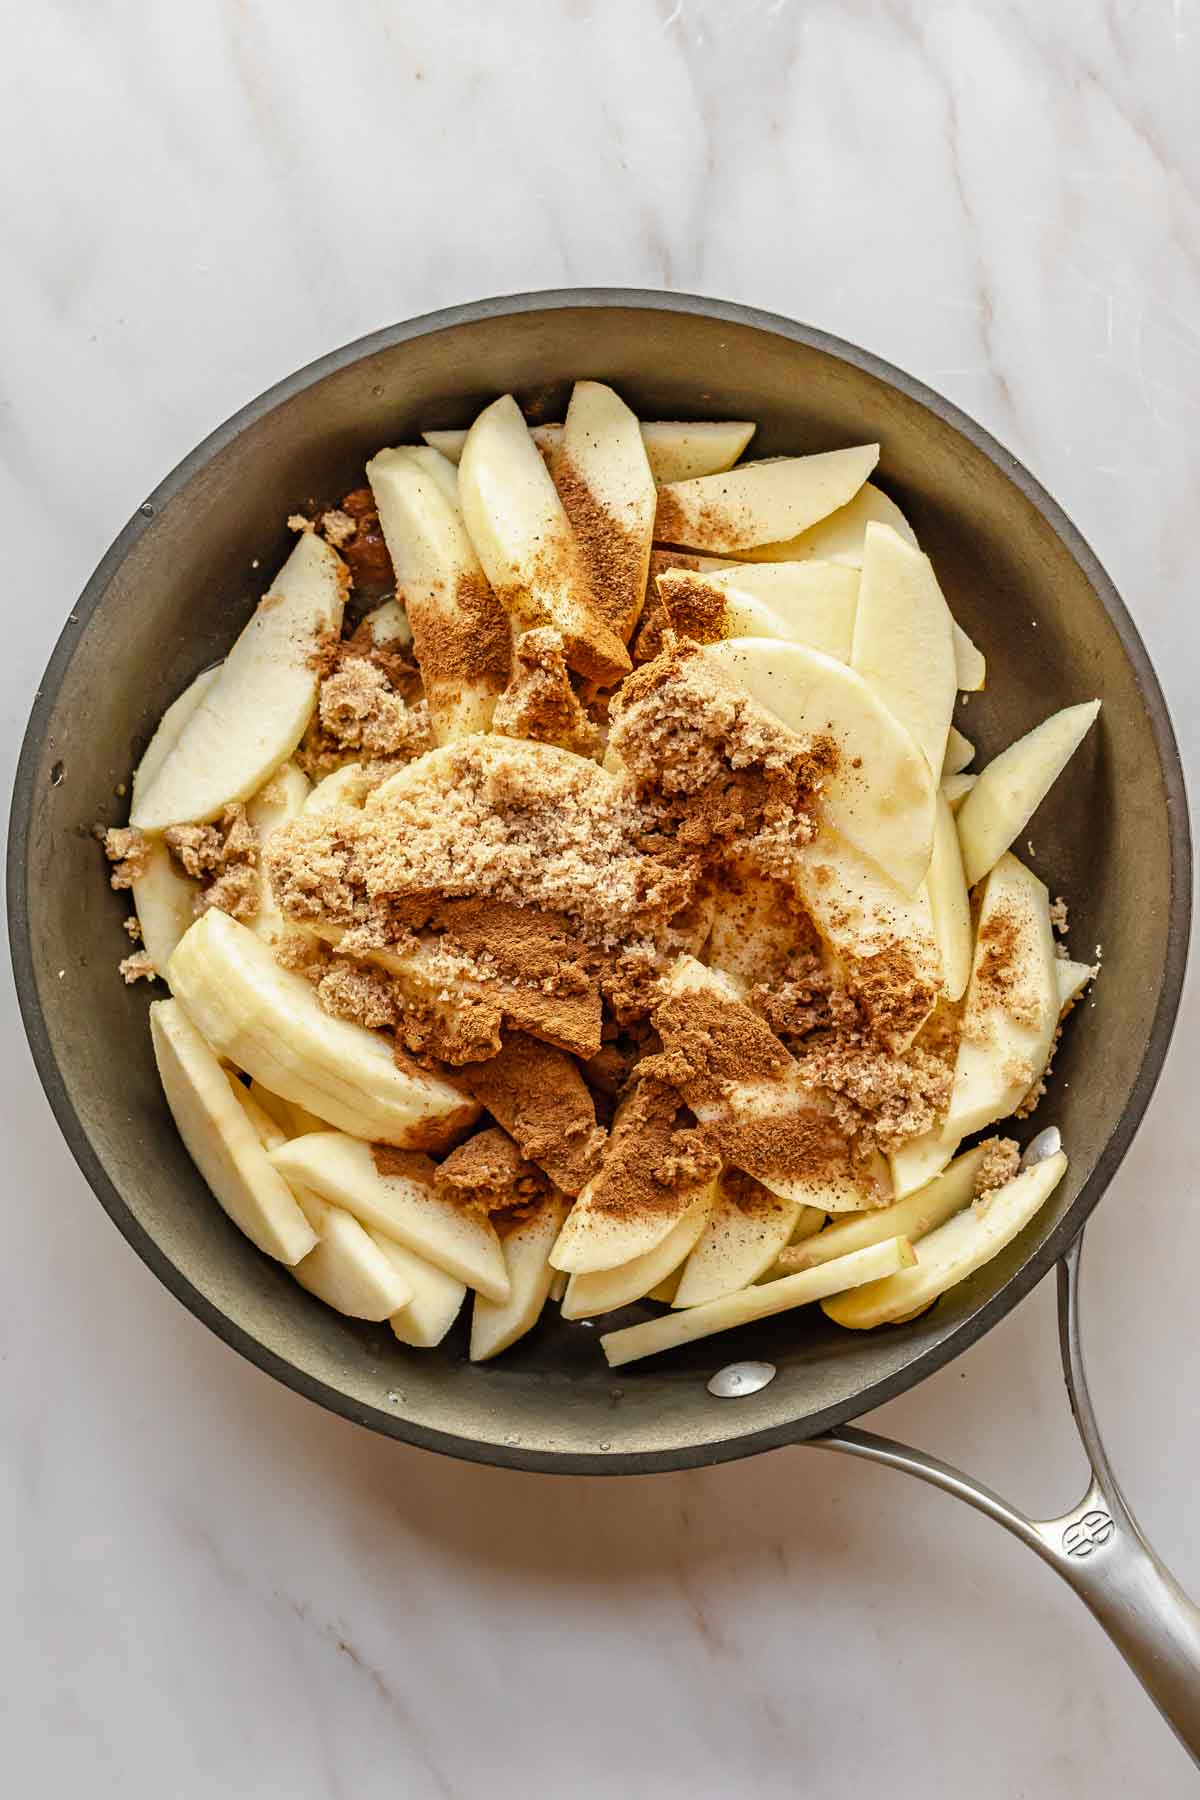 Apples, sugar, and spices in a pan.